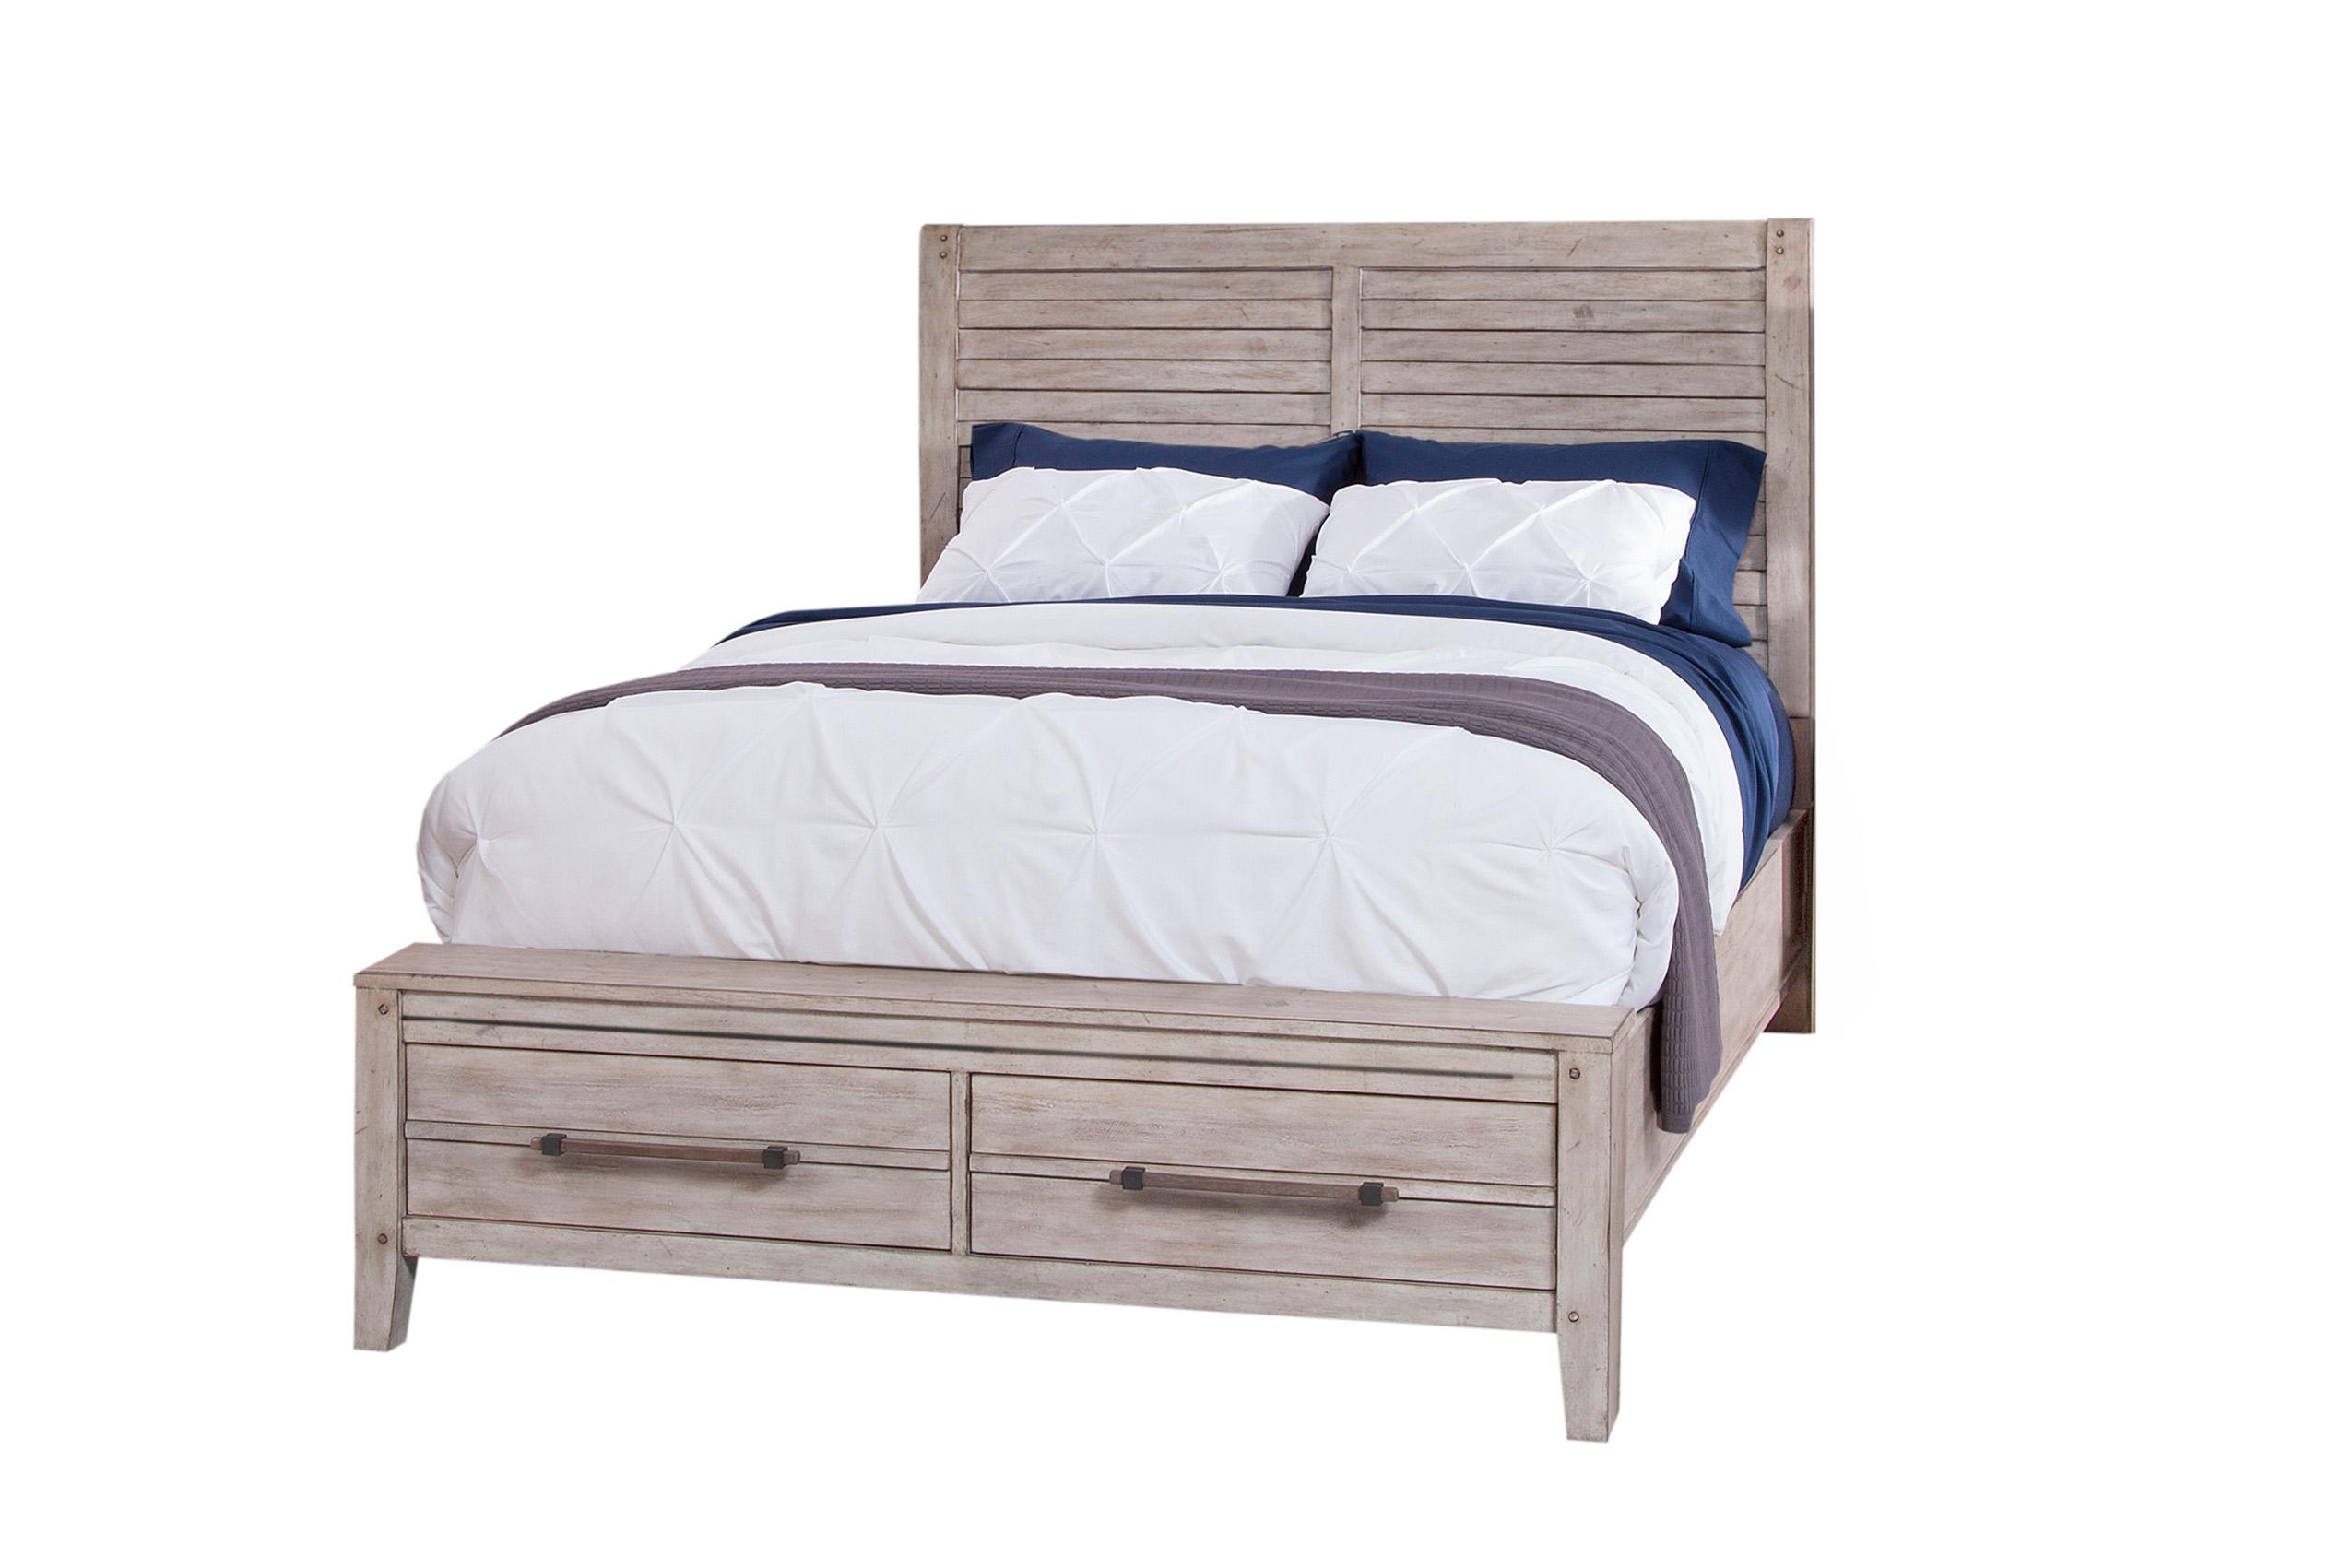 

    
American Woodcrafters AURORA 2810-50PSB Panel Bedroom Set whitewash 2810-QPNST-5PC
